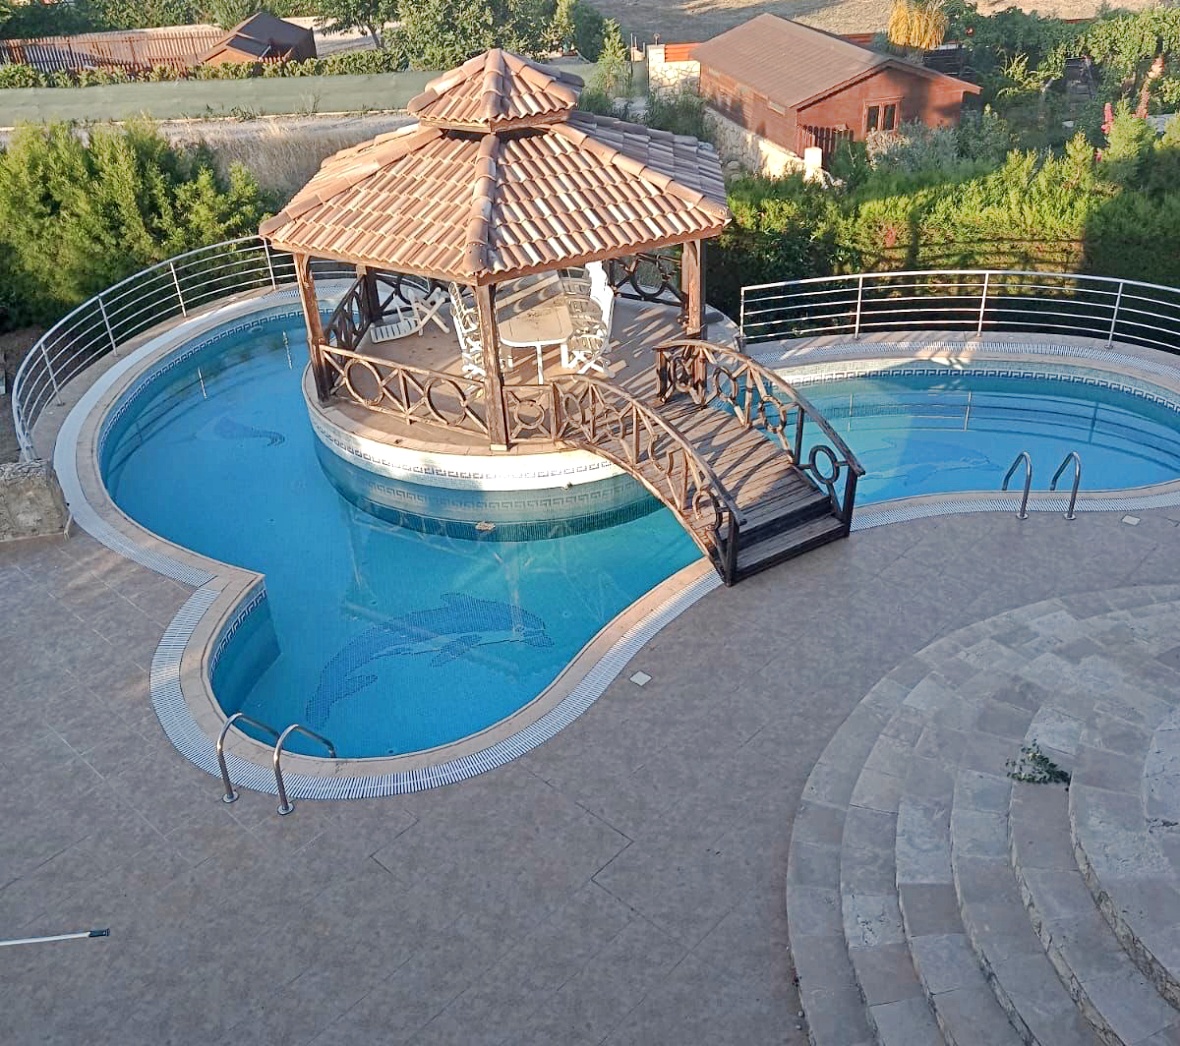 Explore the luxury and comfort of this villa in Karshiak, Northern Cyprus